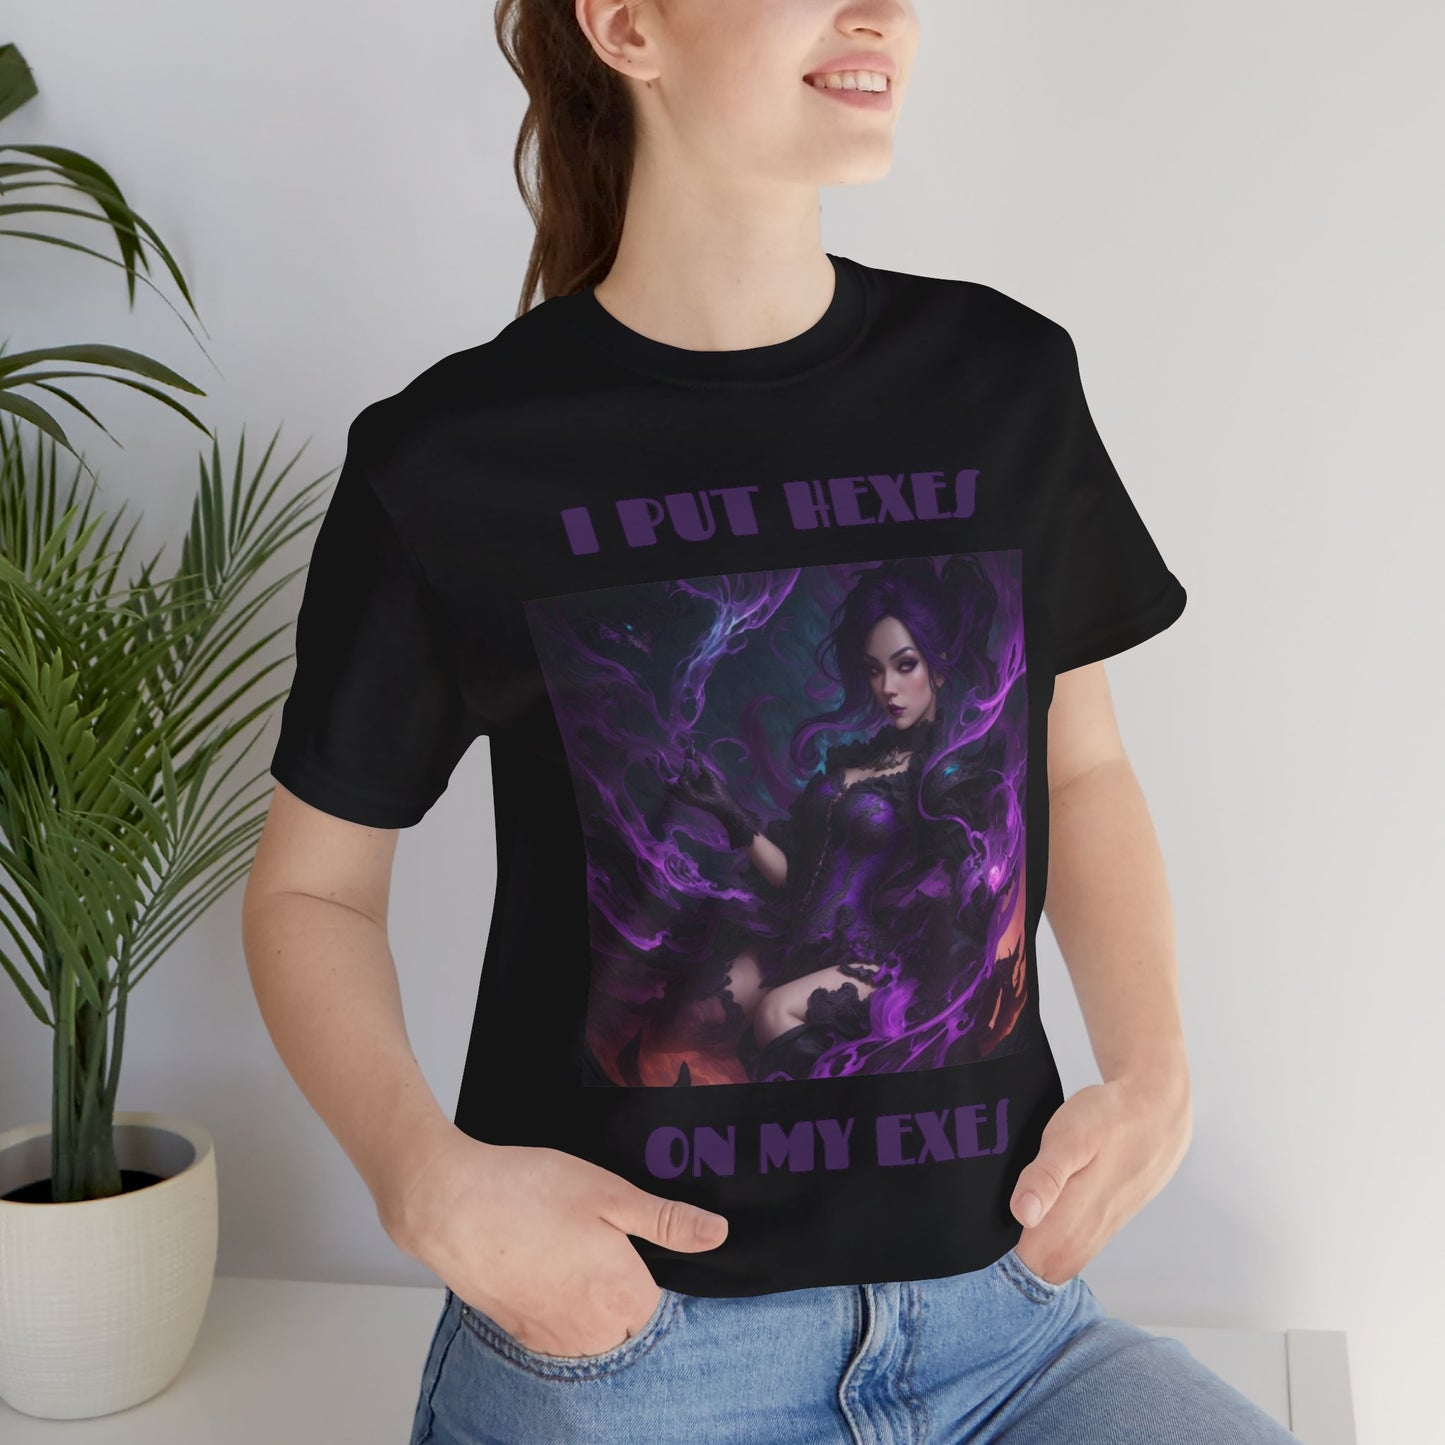 Season Of The Witch | Witchcraft | Hexes | HD Graphic | Funny | The Craft | Wicca |  Unisex | Men's | Women's | Tee | T-Shirt